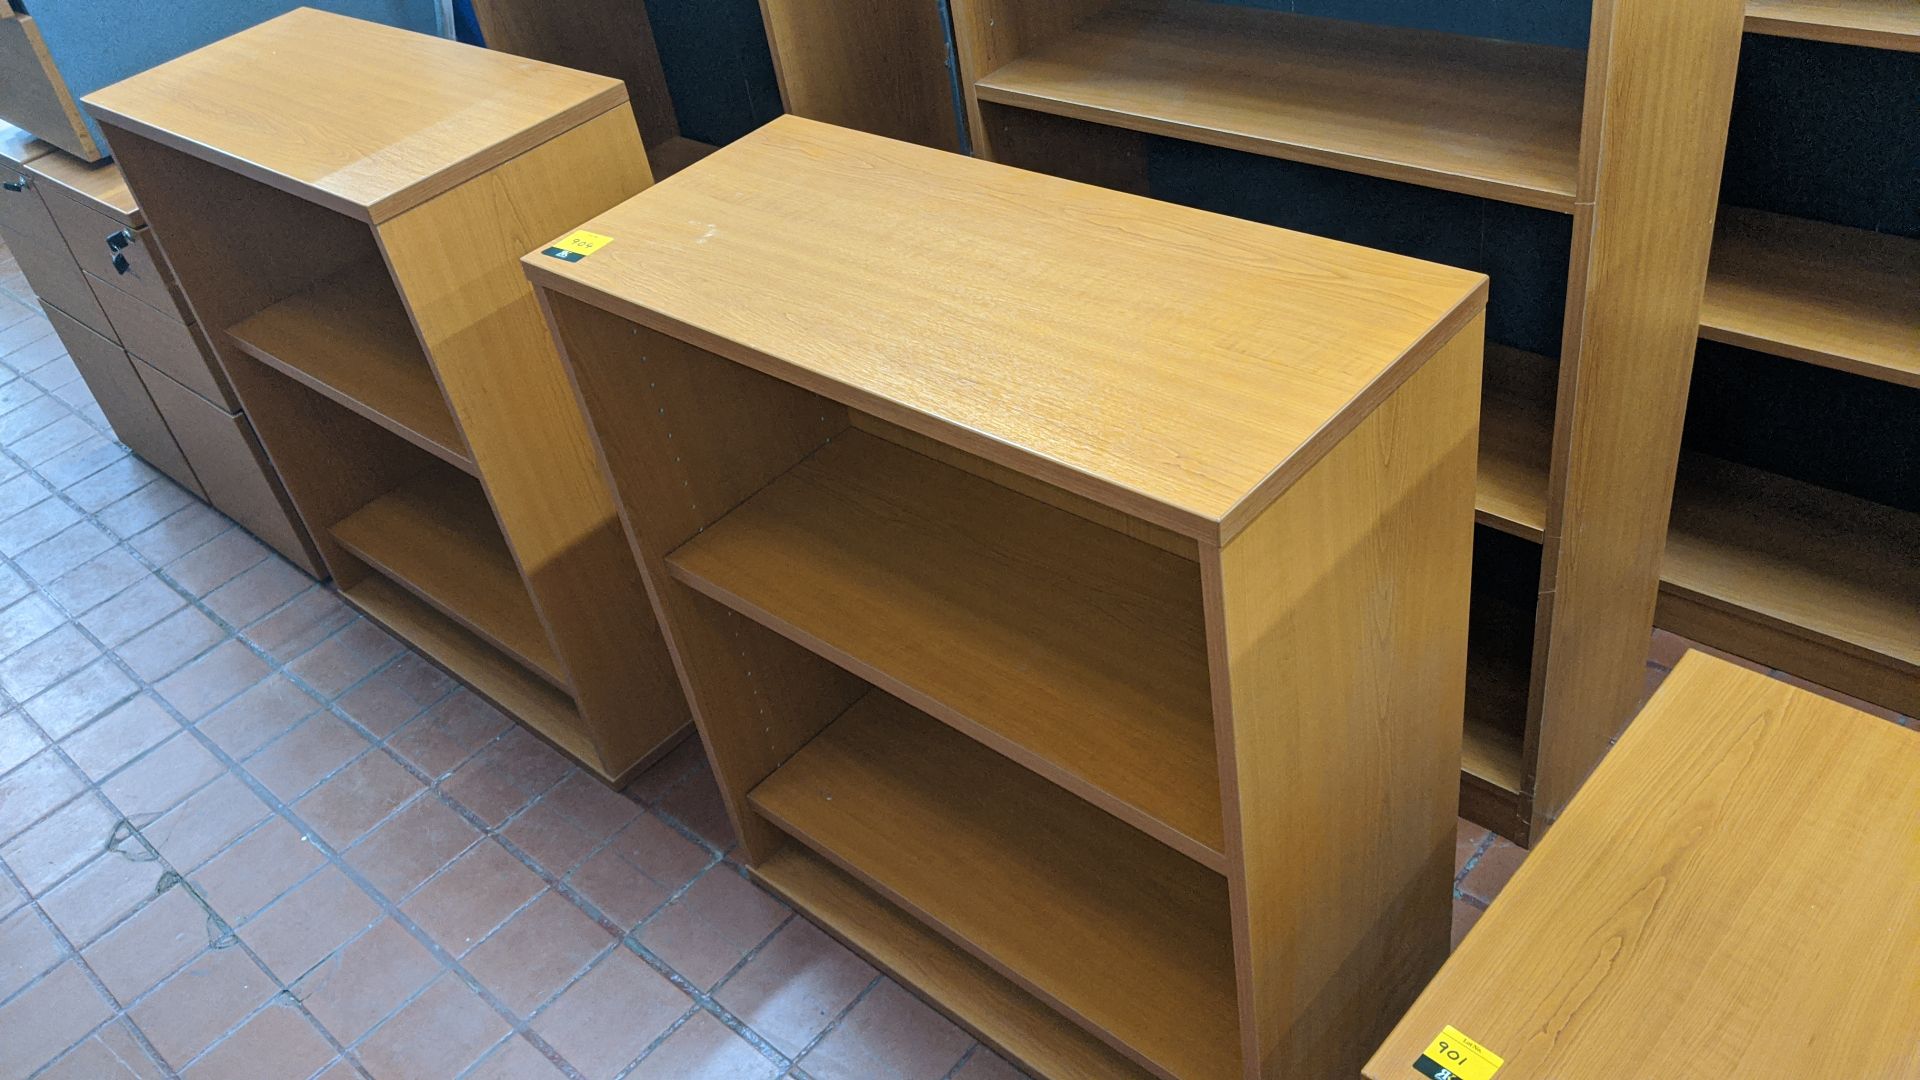 2 off small open front wooden bookcases to match the bulk of the other office furniture in this